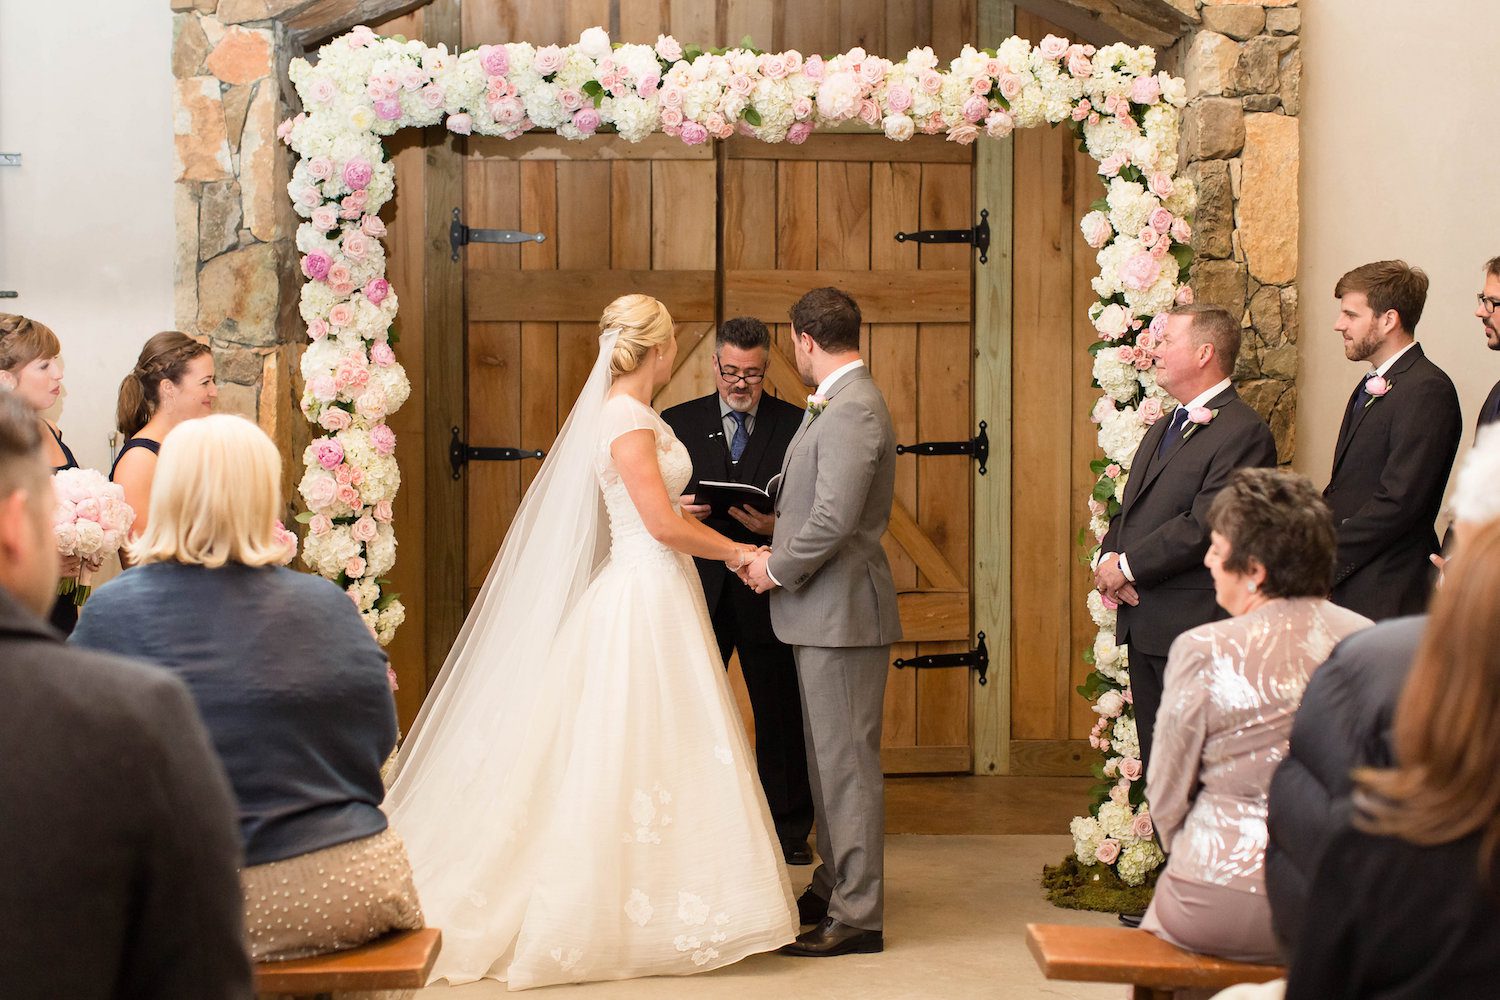 Full floral arch with Peonies, Hydrangea and Garden Roses at Stone Tower Winery. Photography by Candice Adelle.